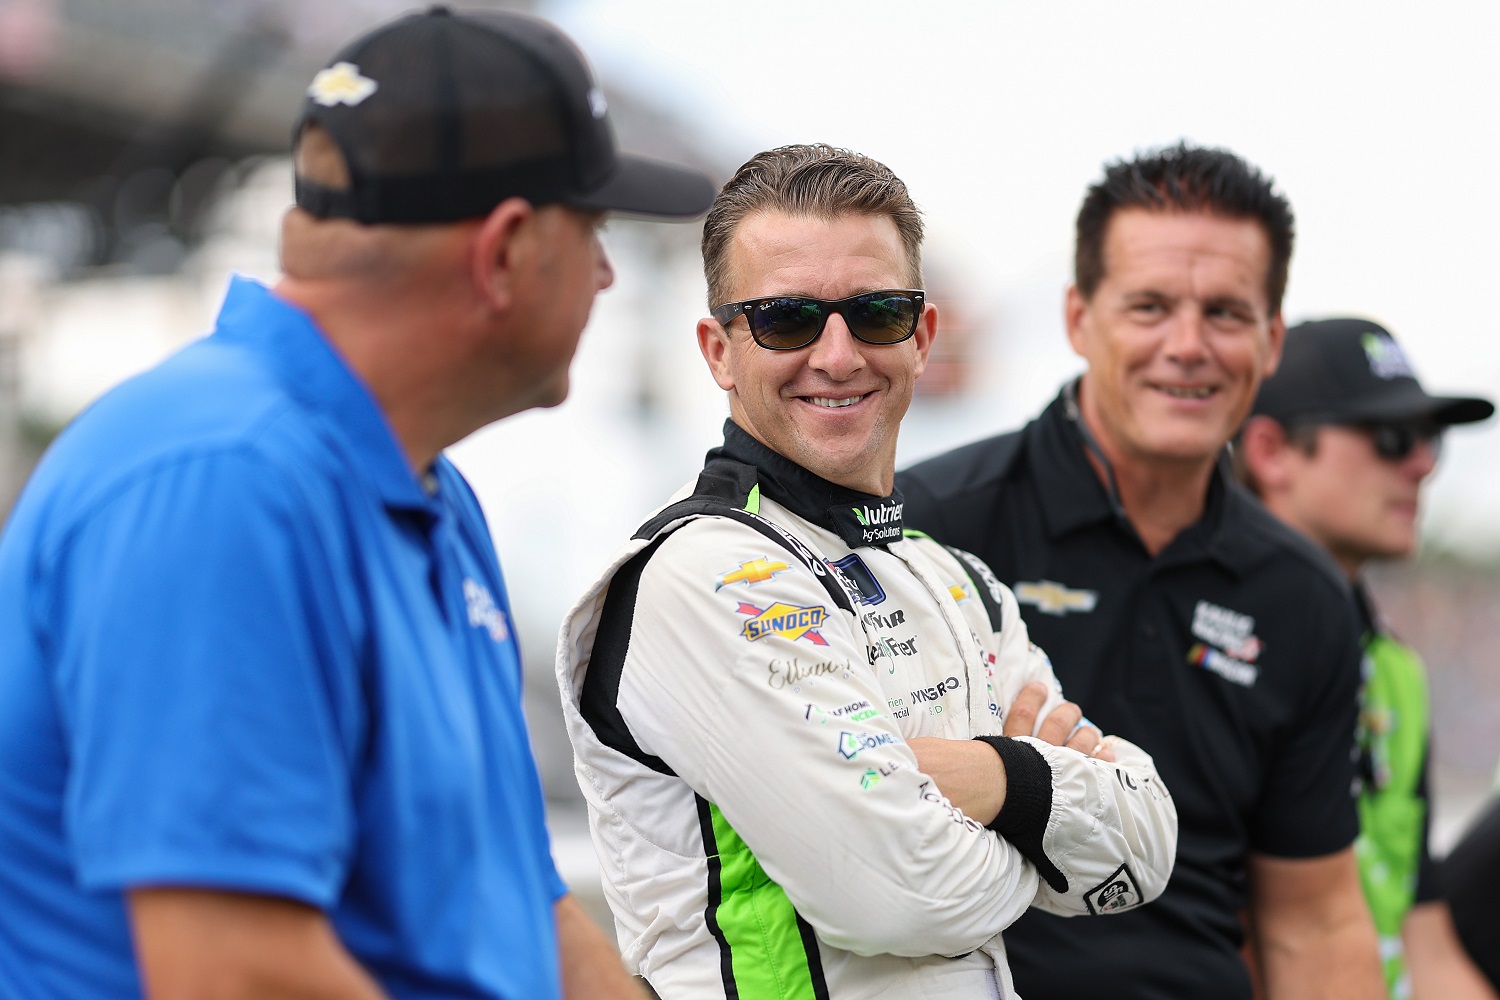 Team president Chris Rice, driver AJ Allmendinger, and owner Matt Kaulig of Kaulig Racing talk on the grid prior to the the NASCAR Xfinity Series Pennzoil 150 at the Brickyard at Indianapolis Motor Speedway on July 30, 2022. | James Gilbert/Getty Images